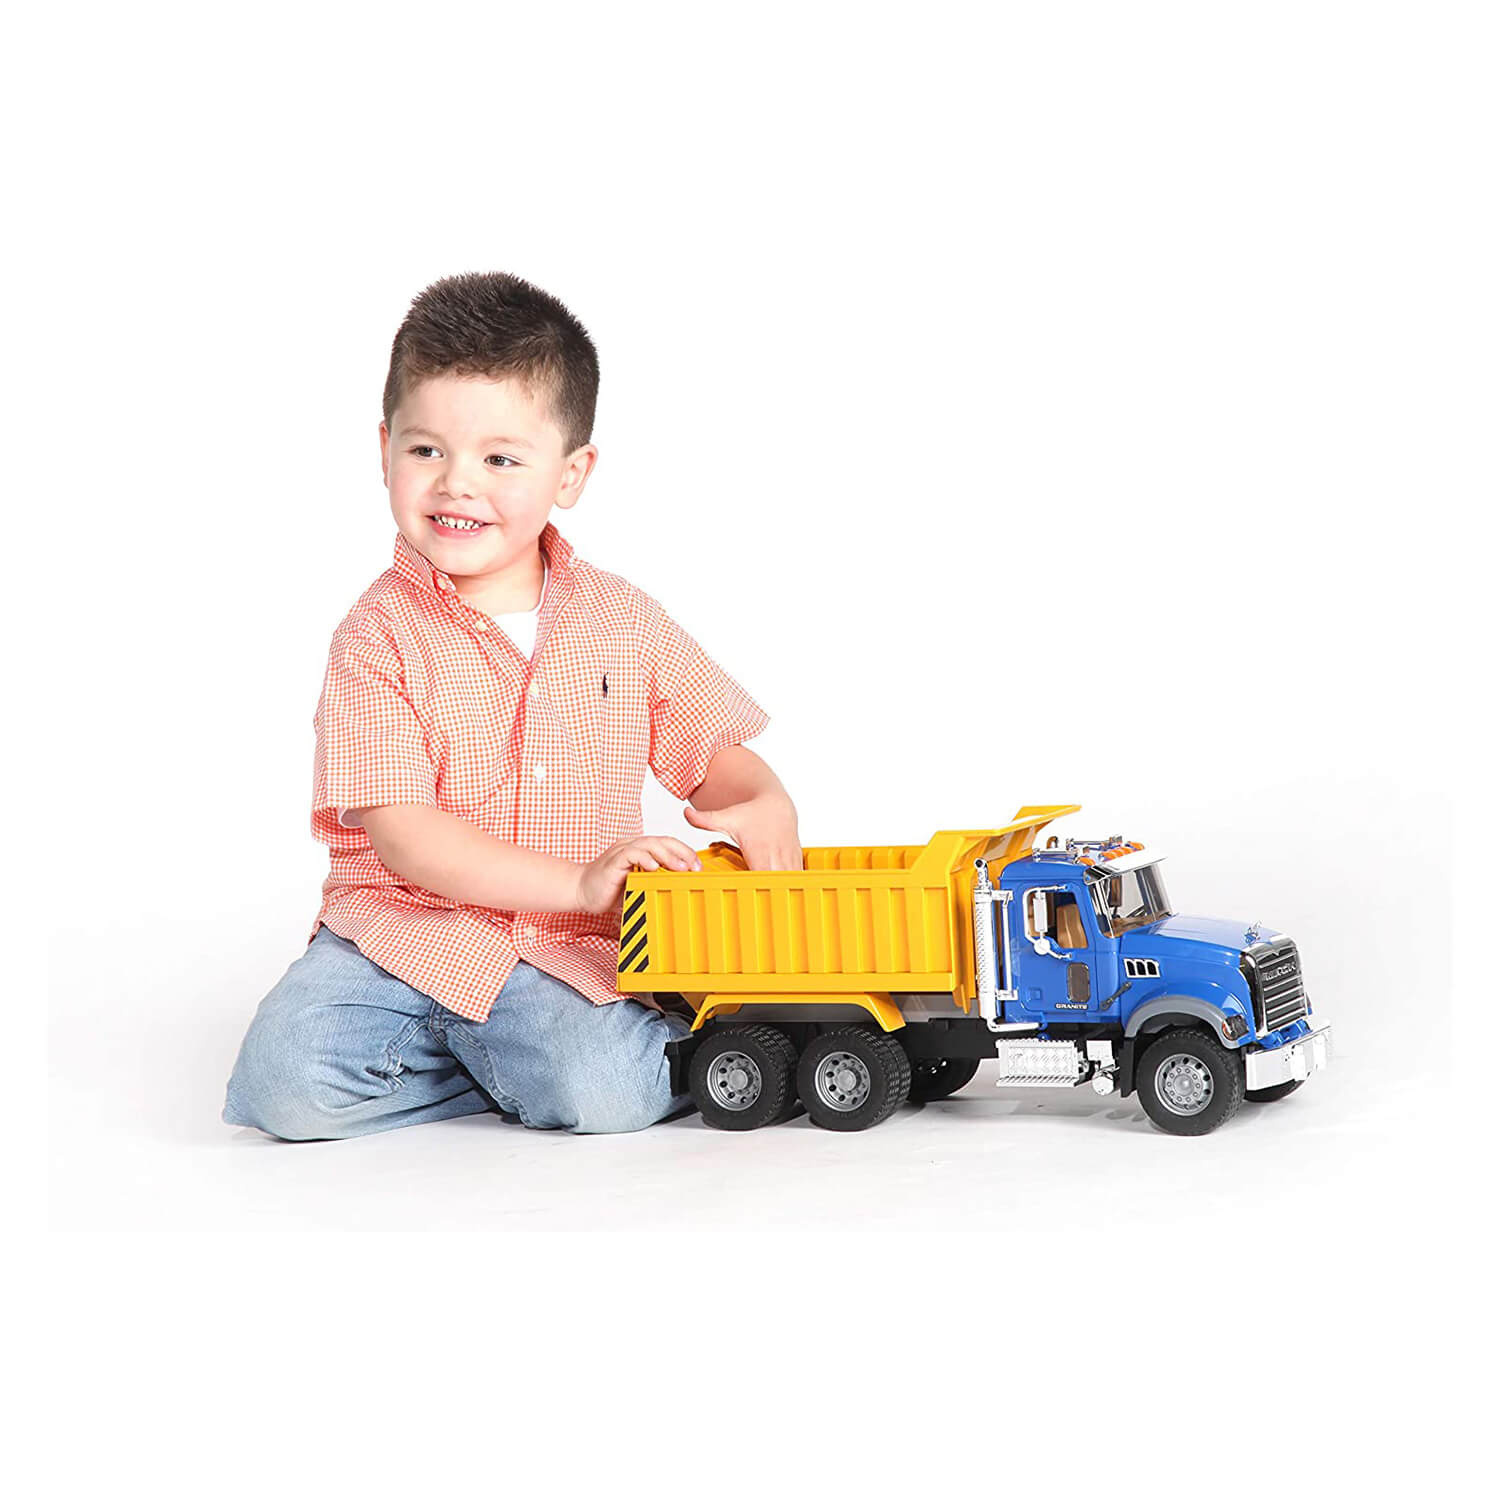 Kid playing with the mack truck toy.